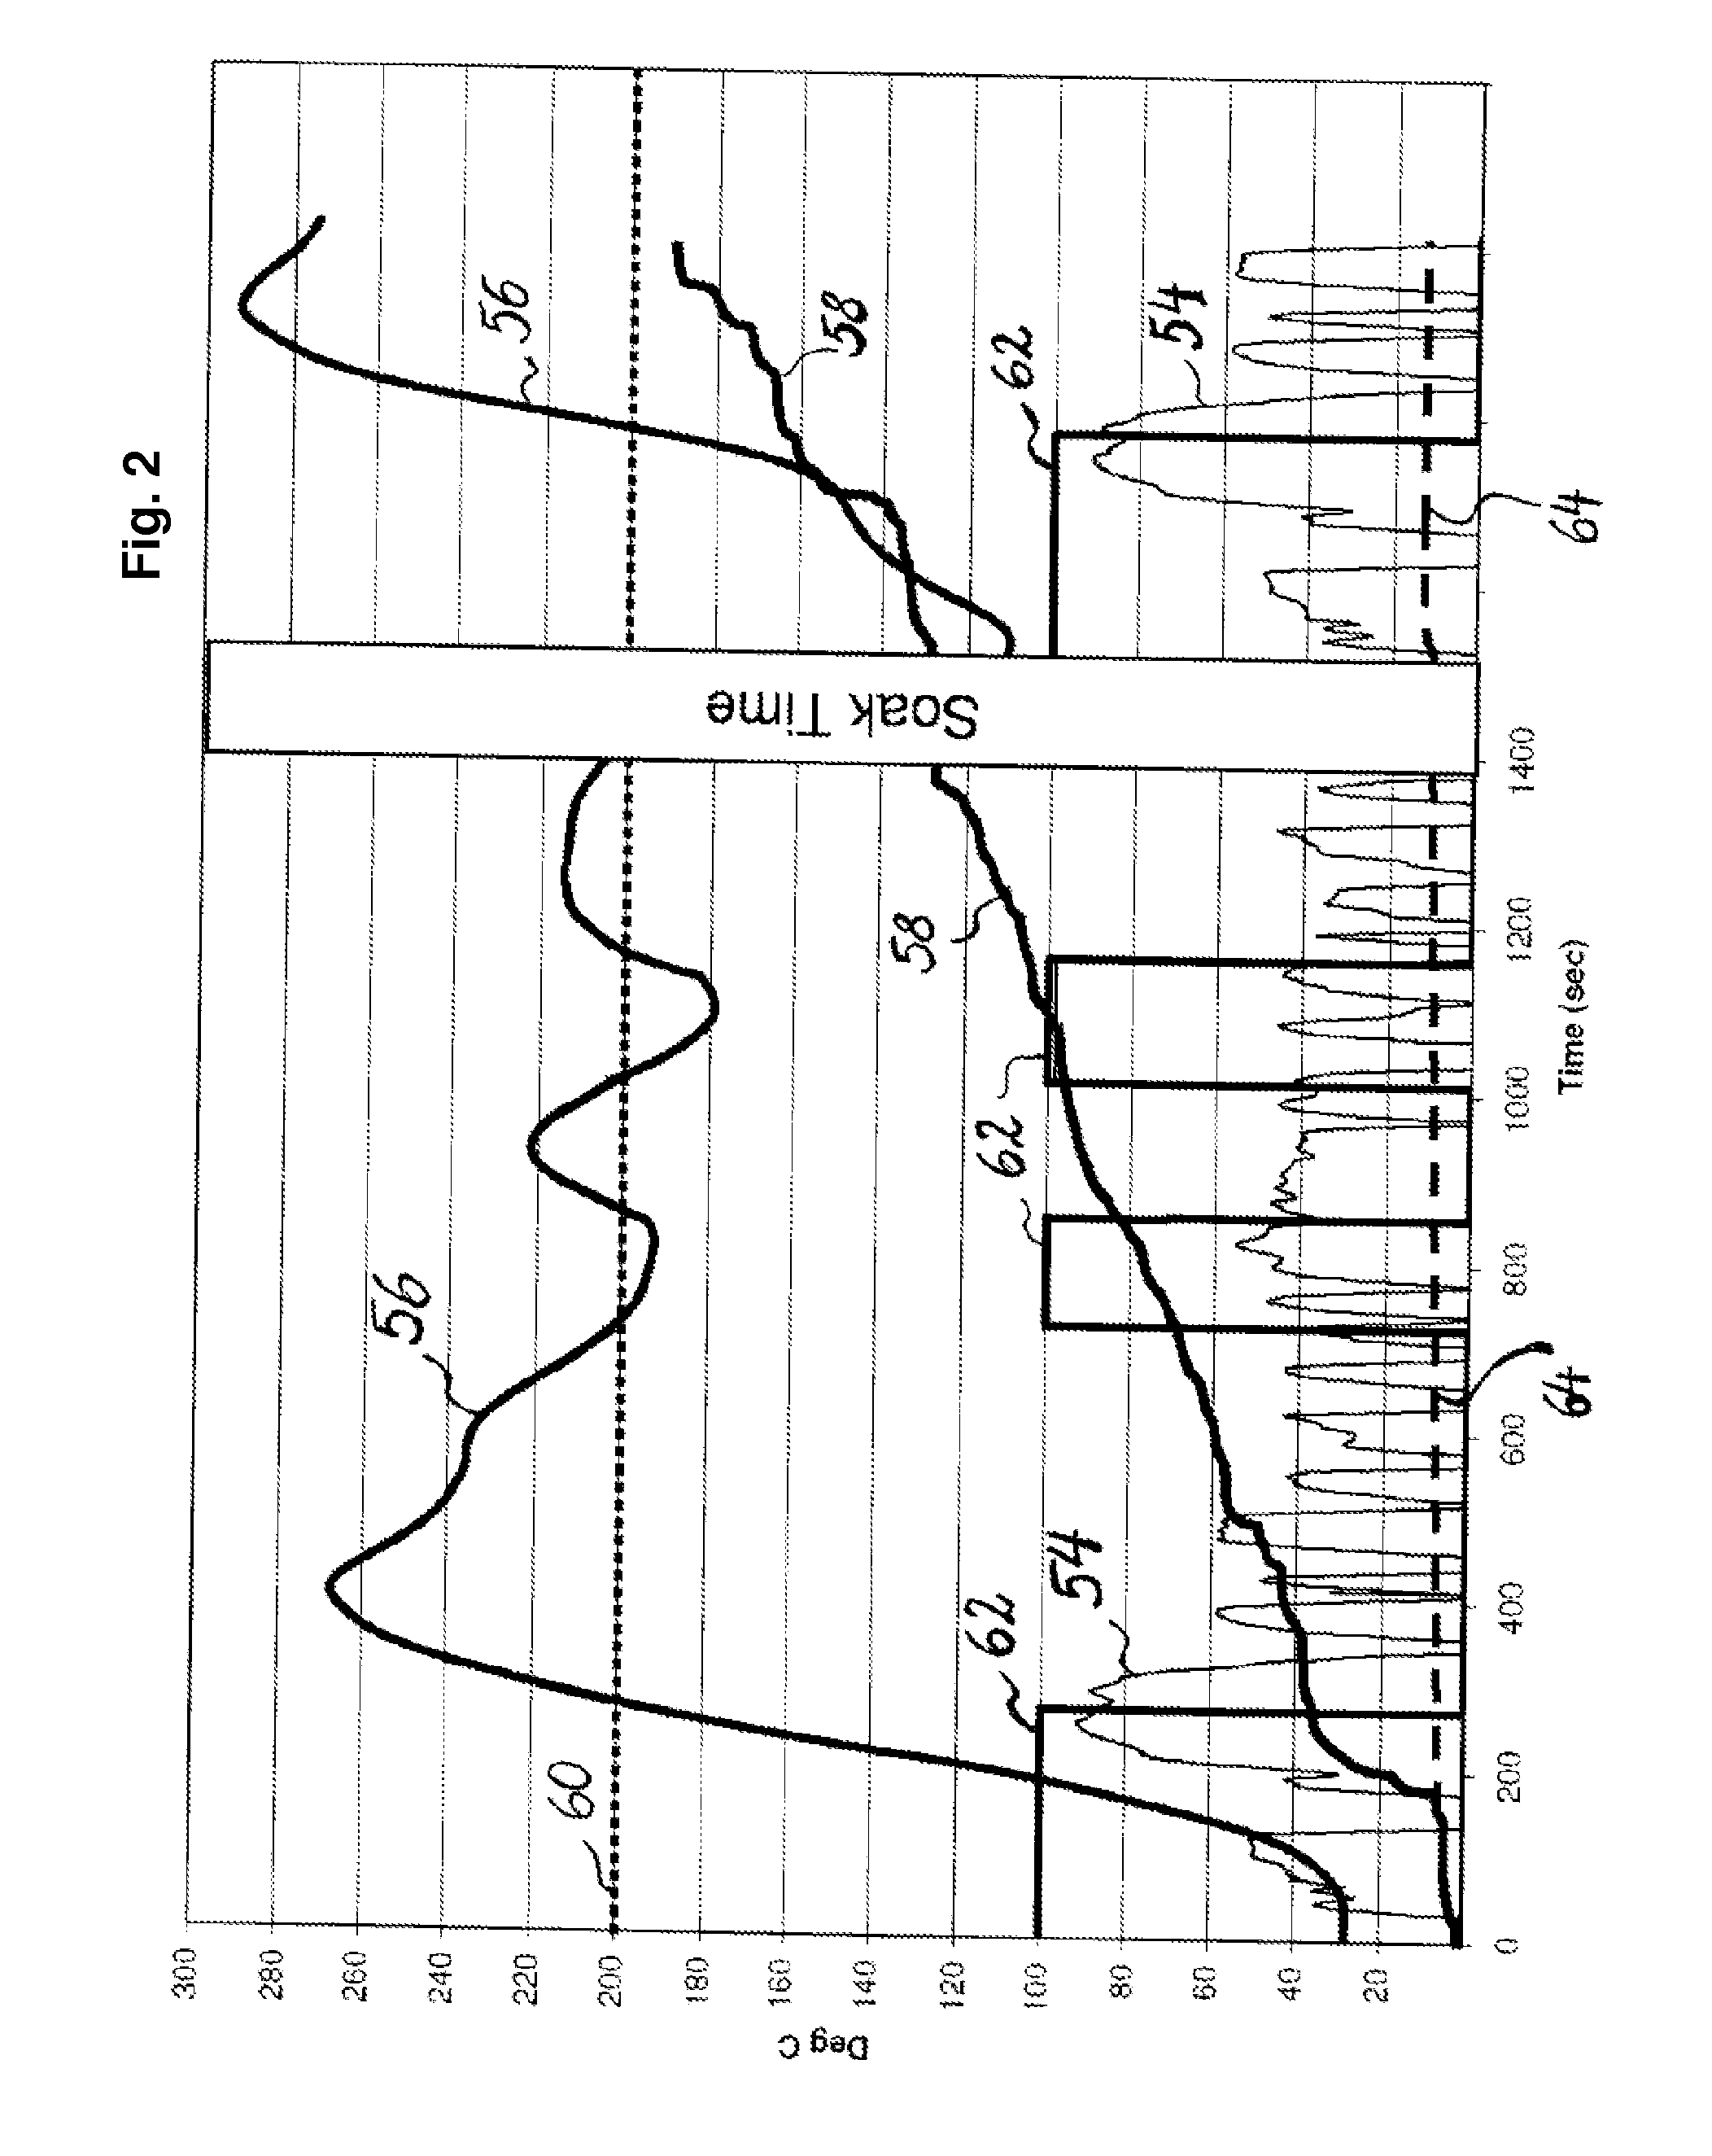 Compression-ignition engine with exhaust system